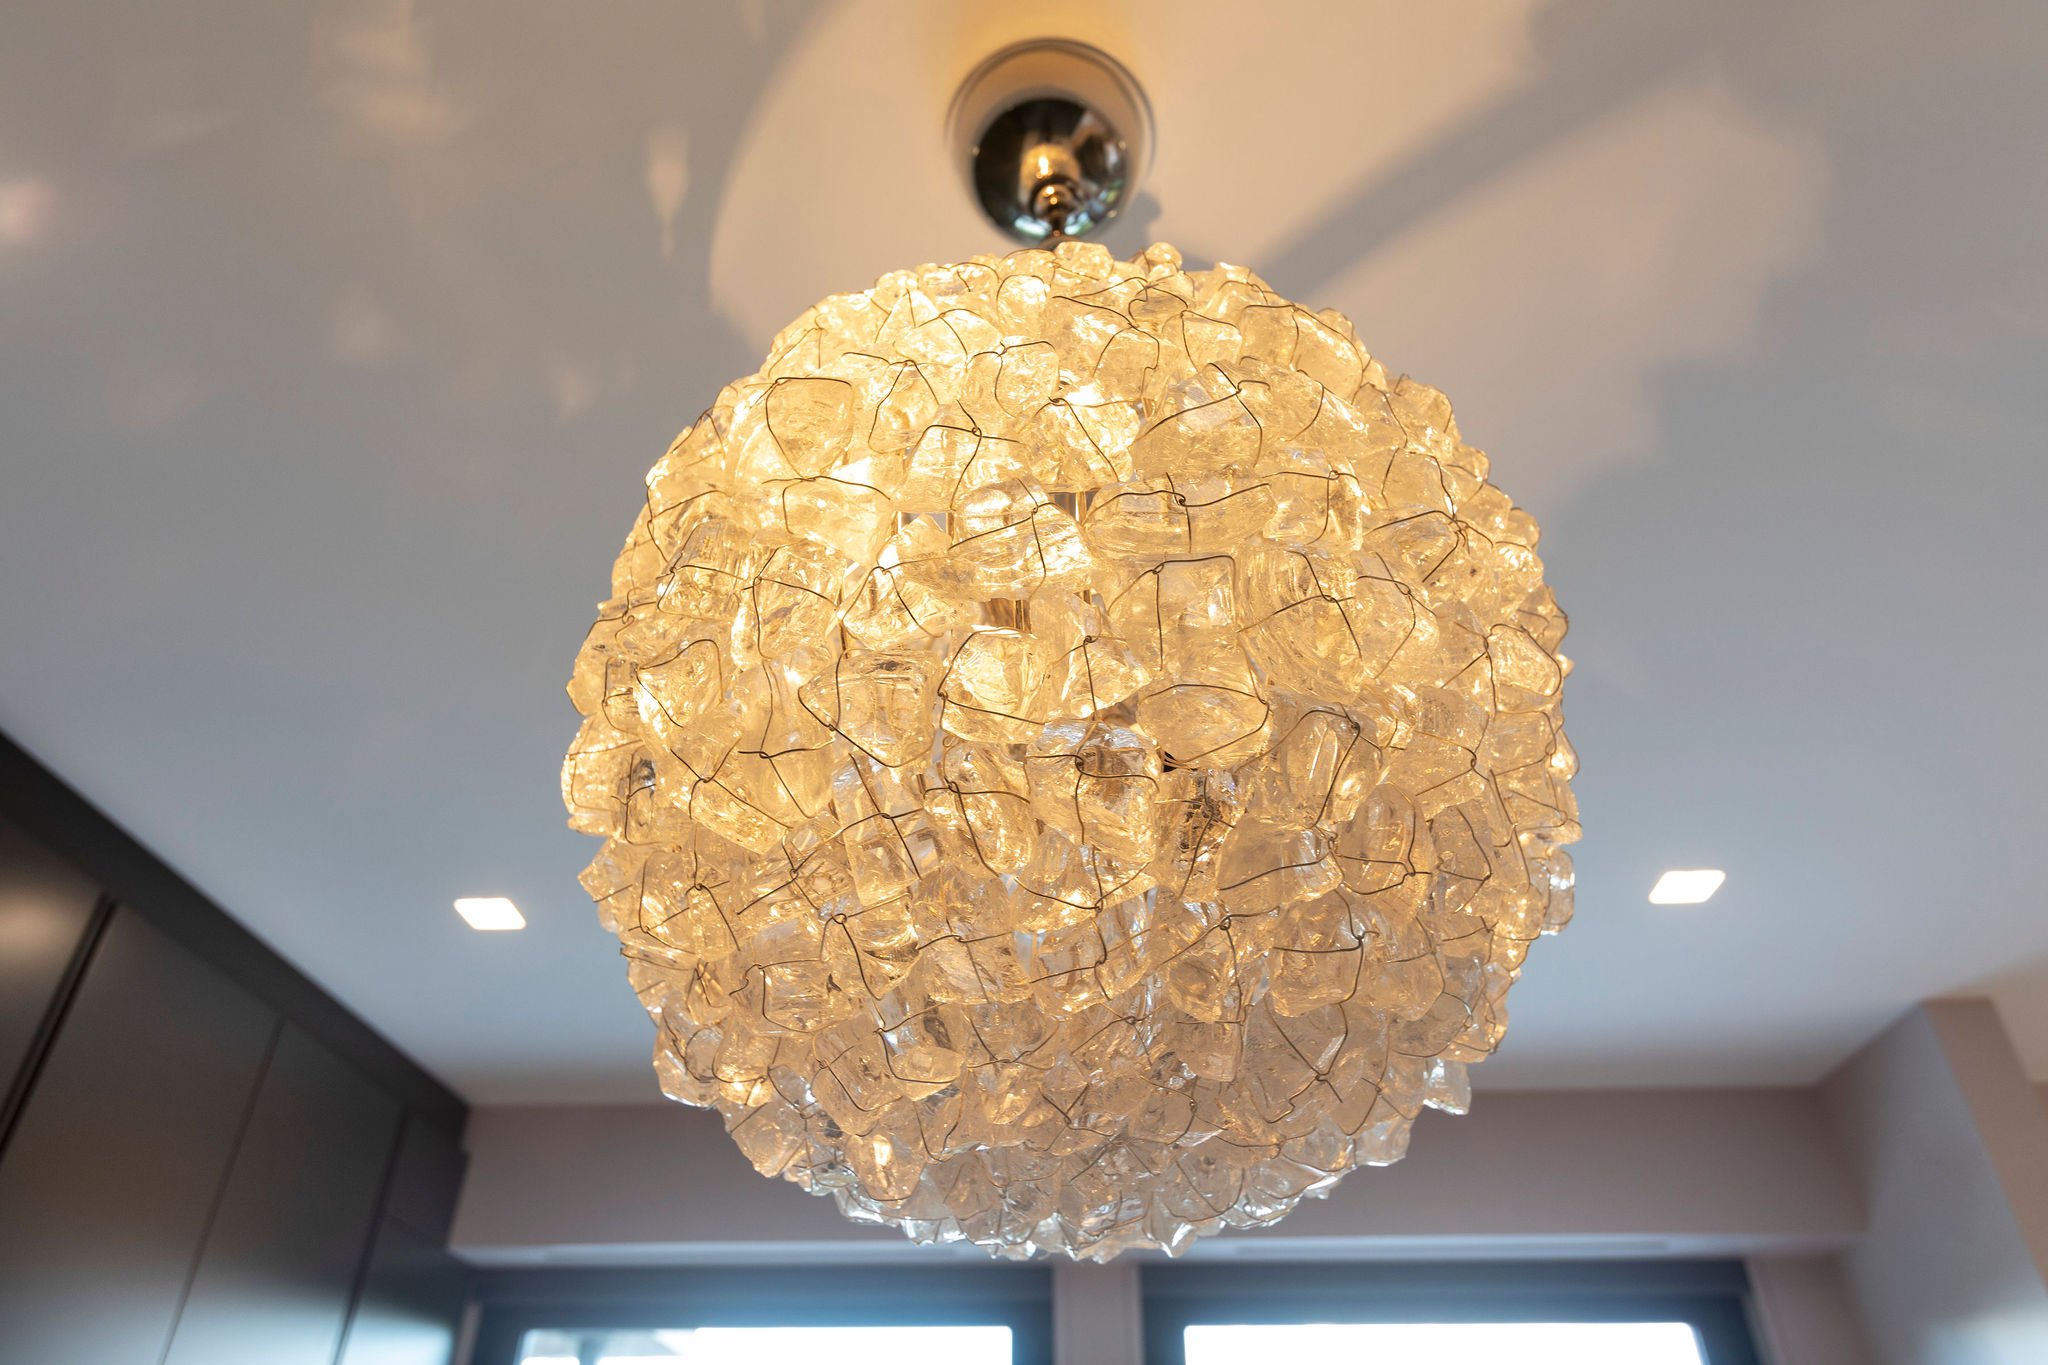  The centerpiece of the closet is this gorgeous rock crystal chandelier which will light up the space in the evenings. 